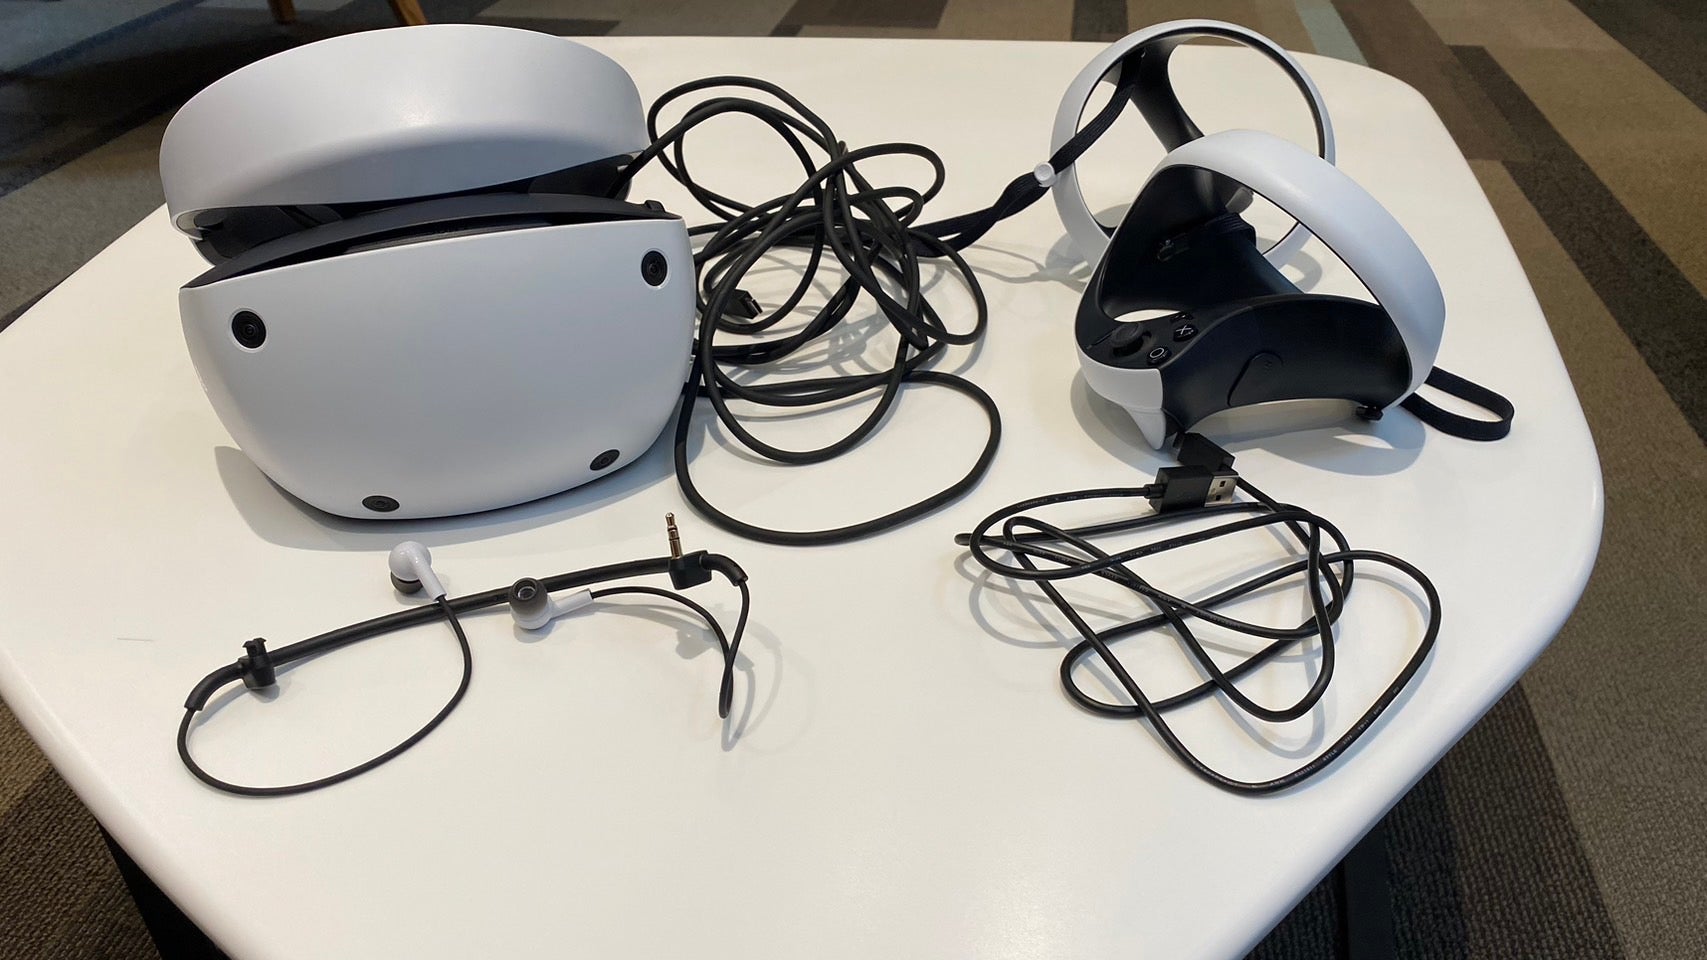 The Sony PSVR 2 with its pack-in material (Photo: Michelle Ehrhardt / Gizmodo)